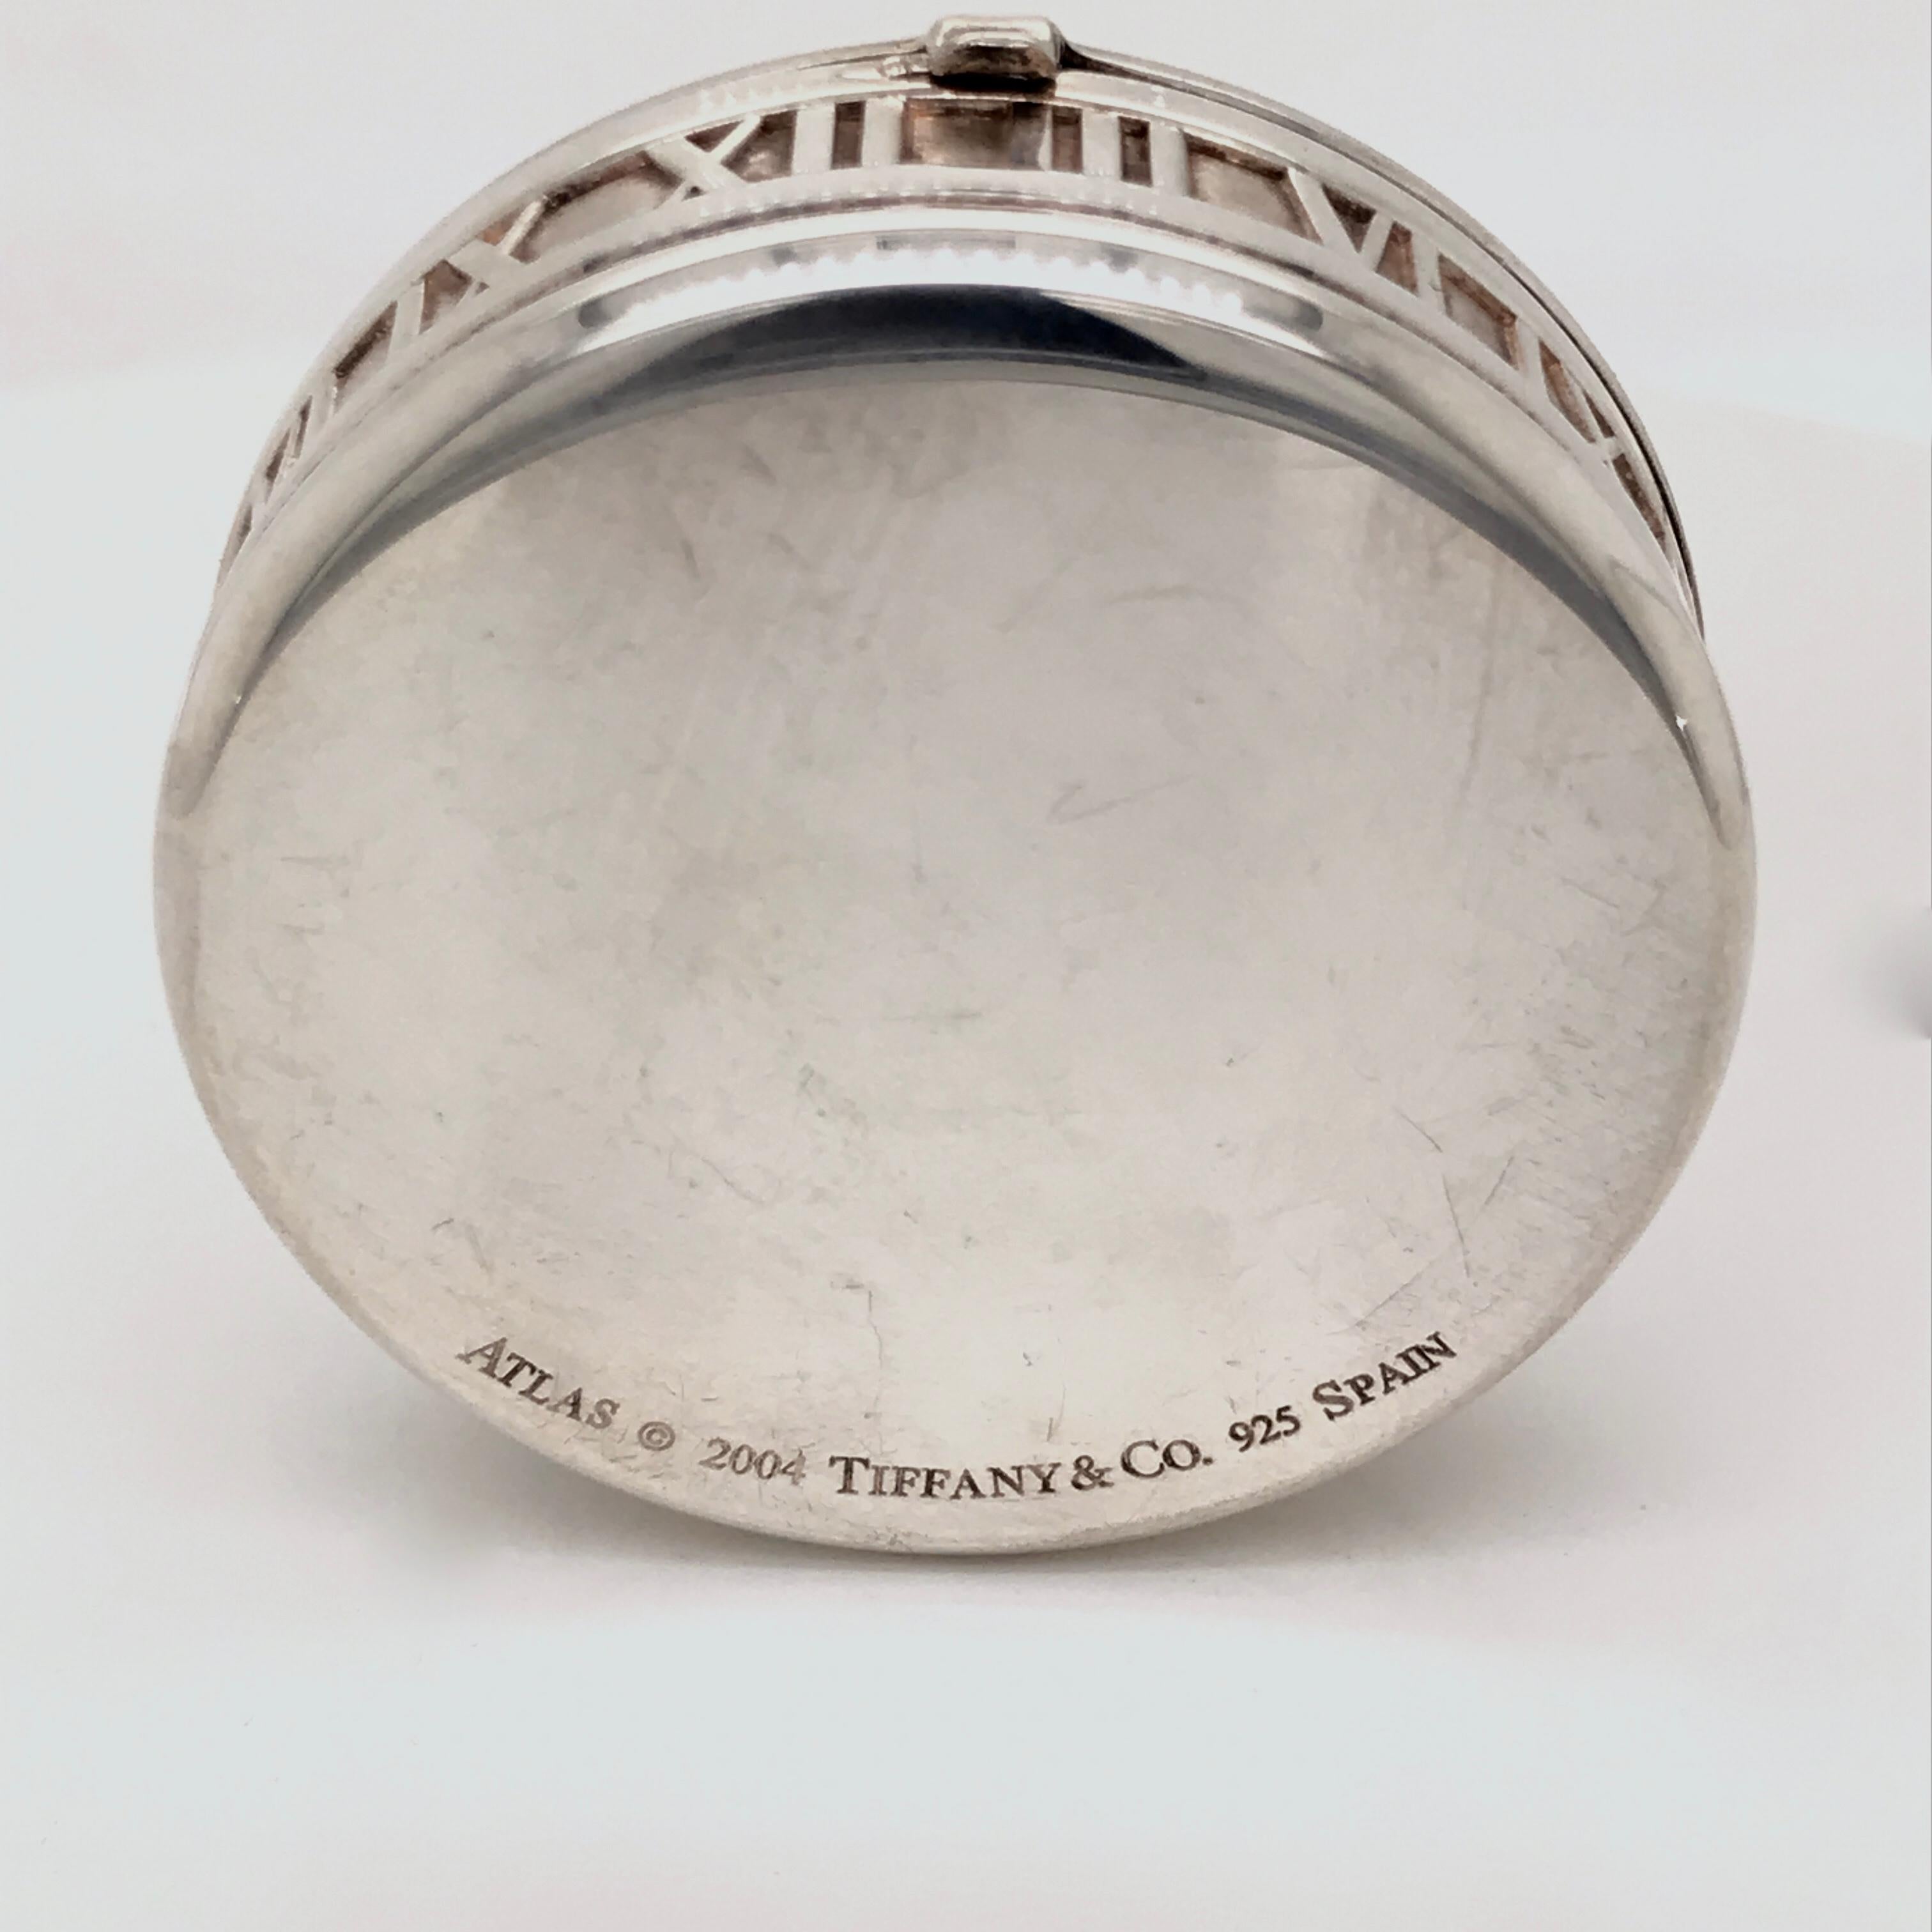 Vintage Tiffany & Co. Sterling Silver Atlas Compass 3